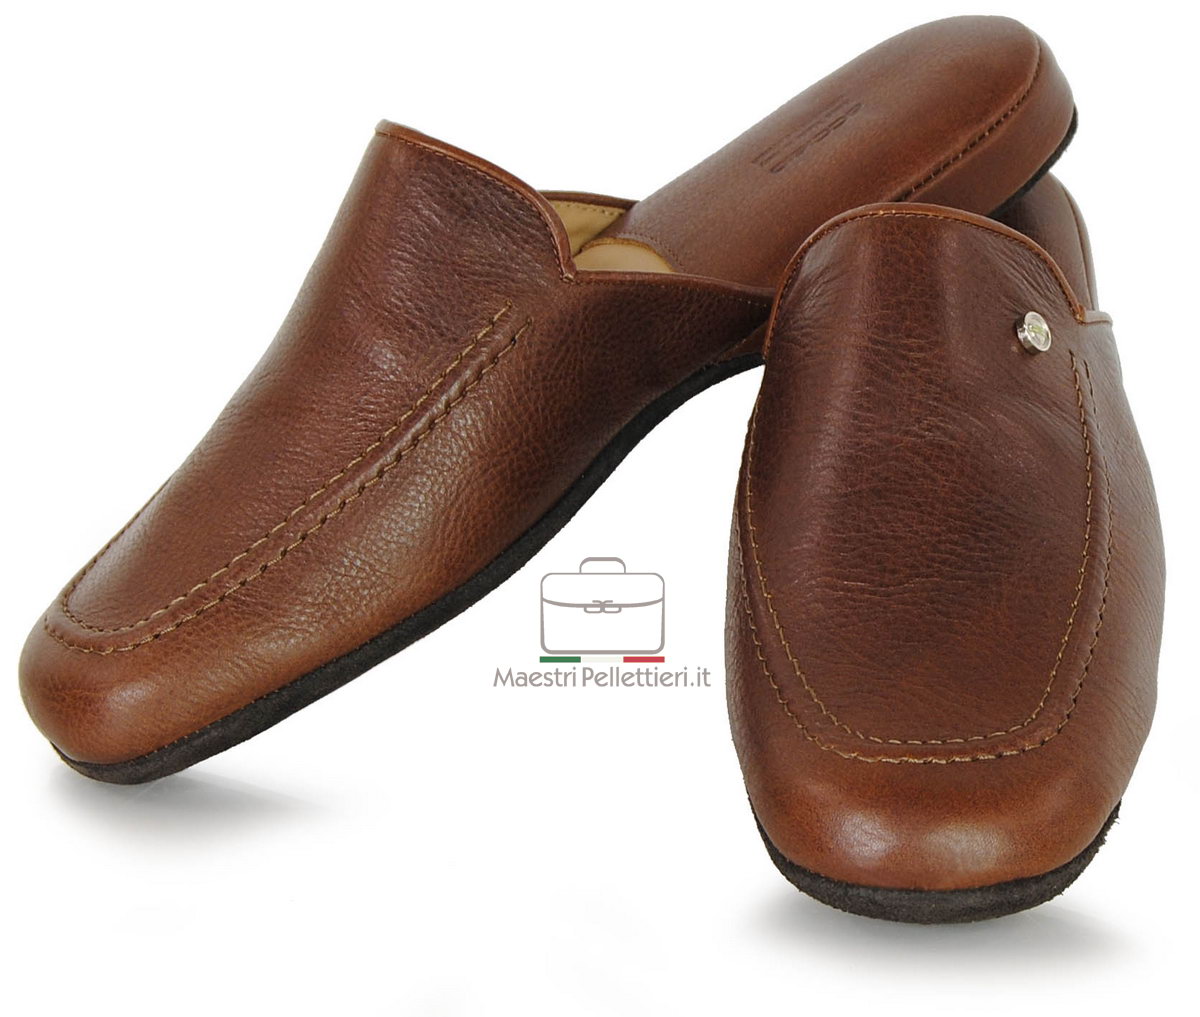 Men's leather slippers - hand made in Italy